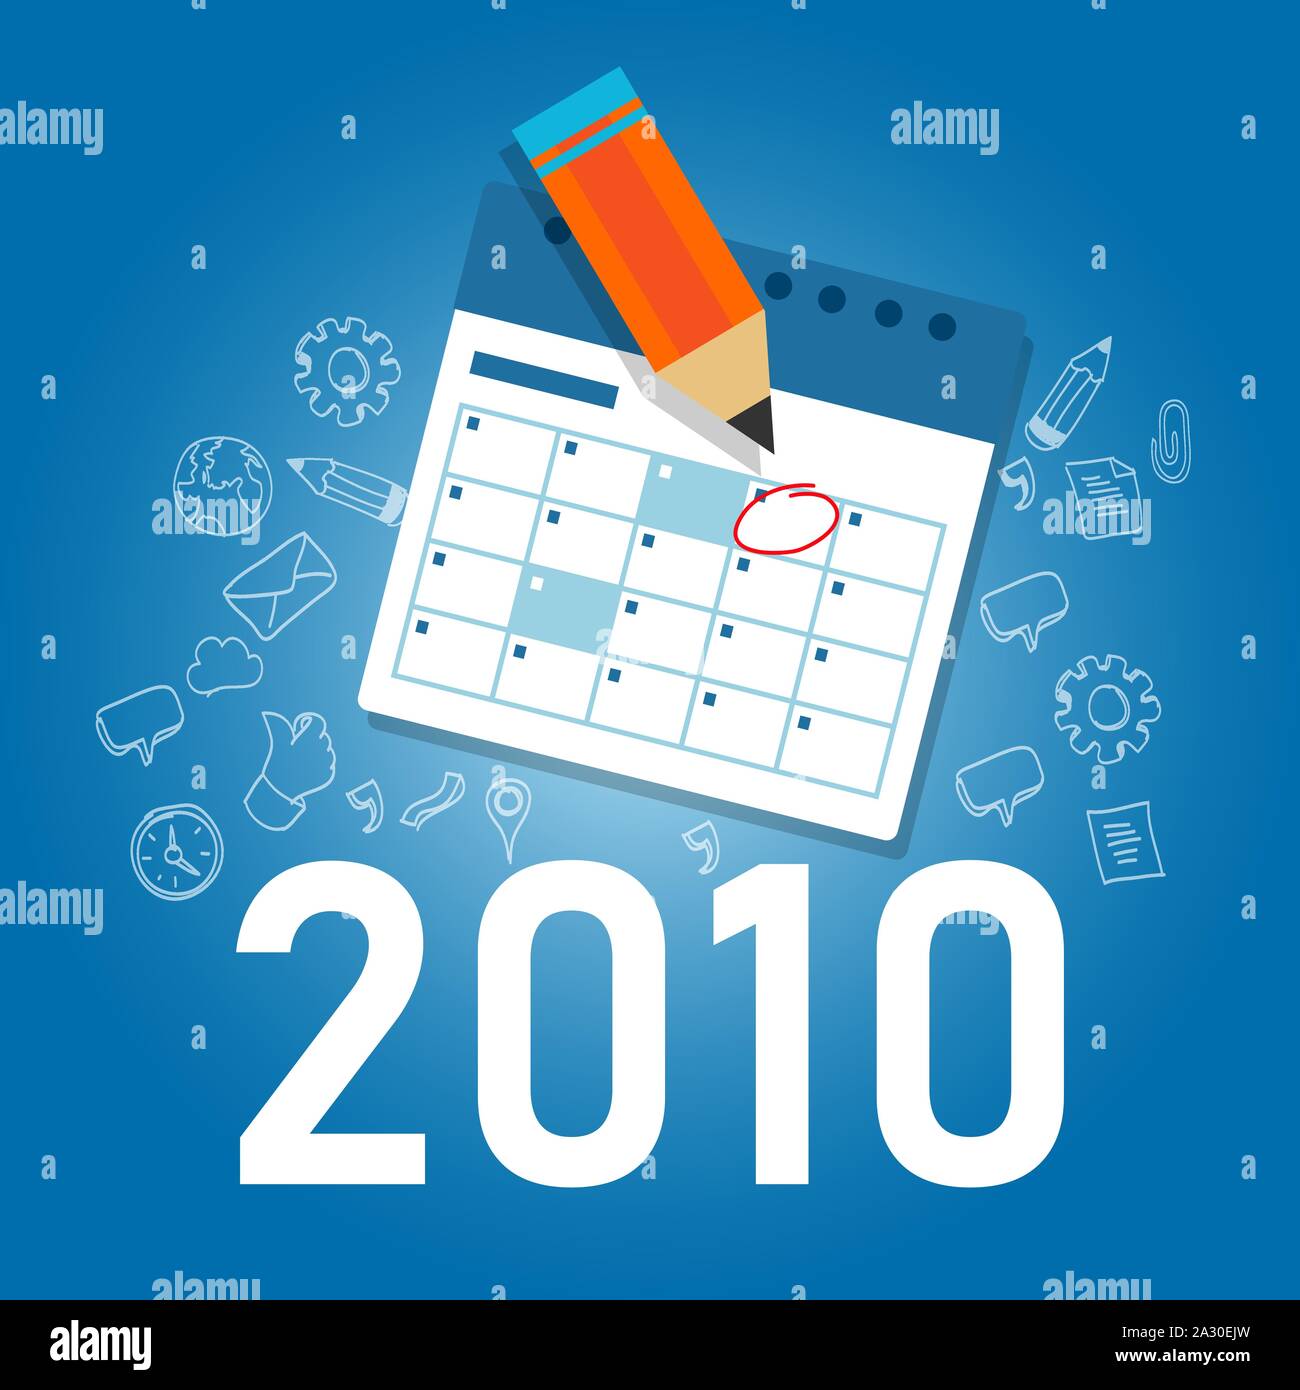 2010 new year target date calendar. Manage company or personal date reminder appointment Stock Vector